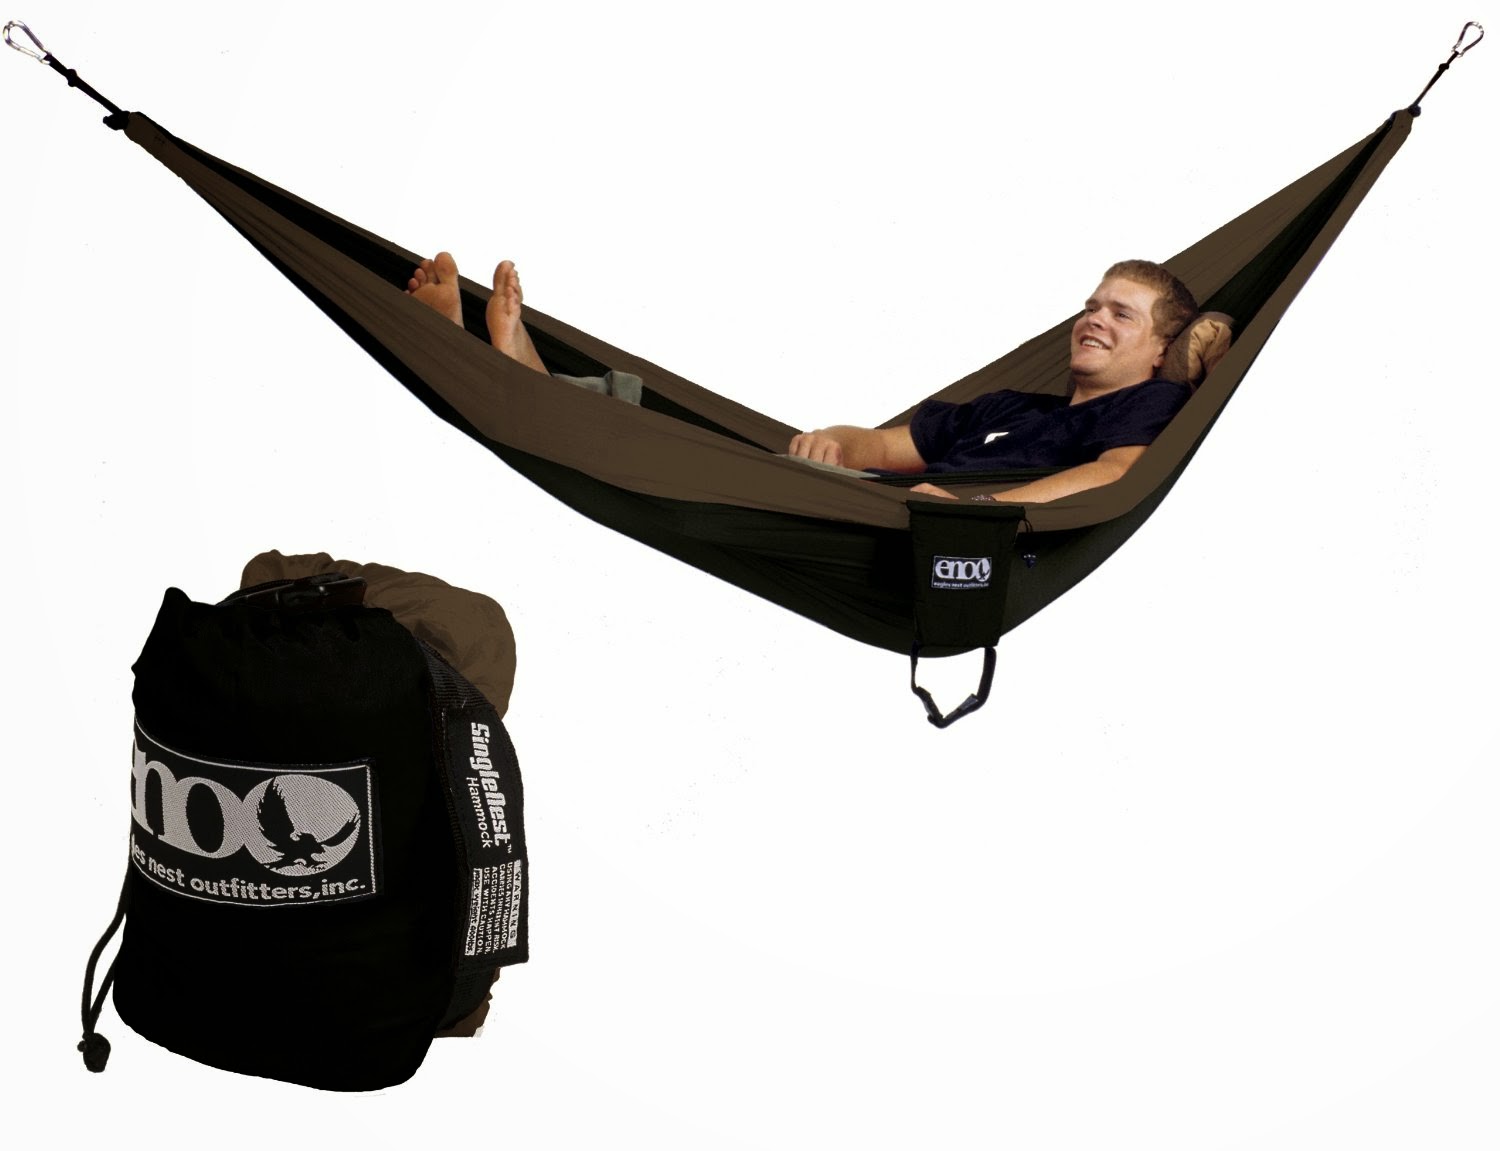 Eagles Nest Outfitters Hammock - 2012